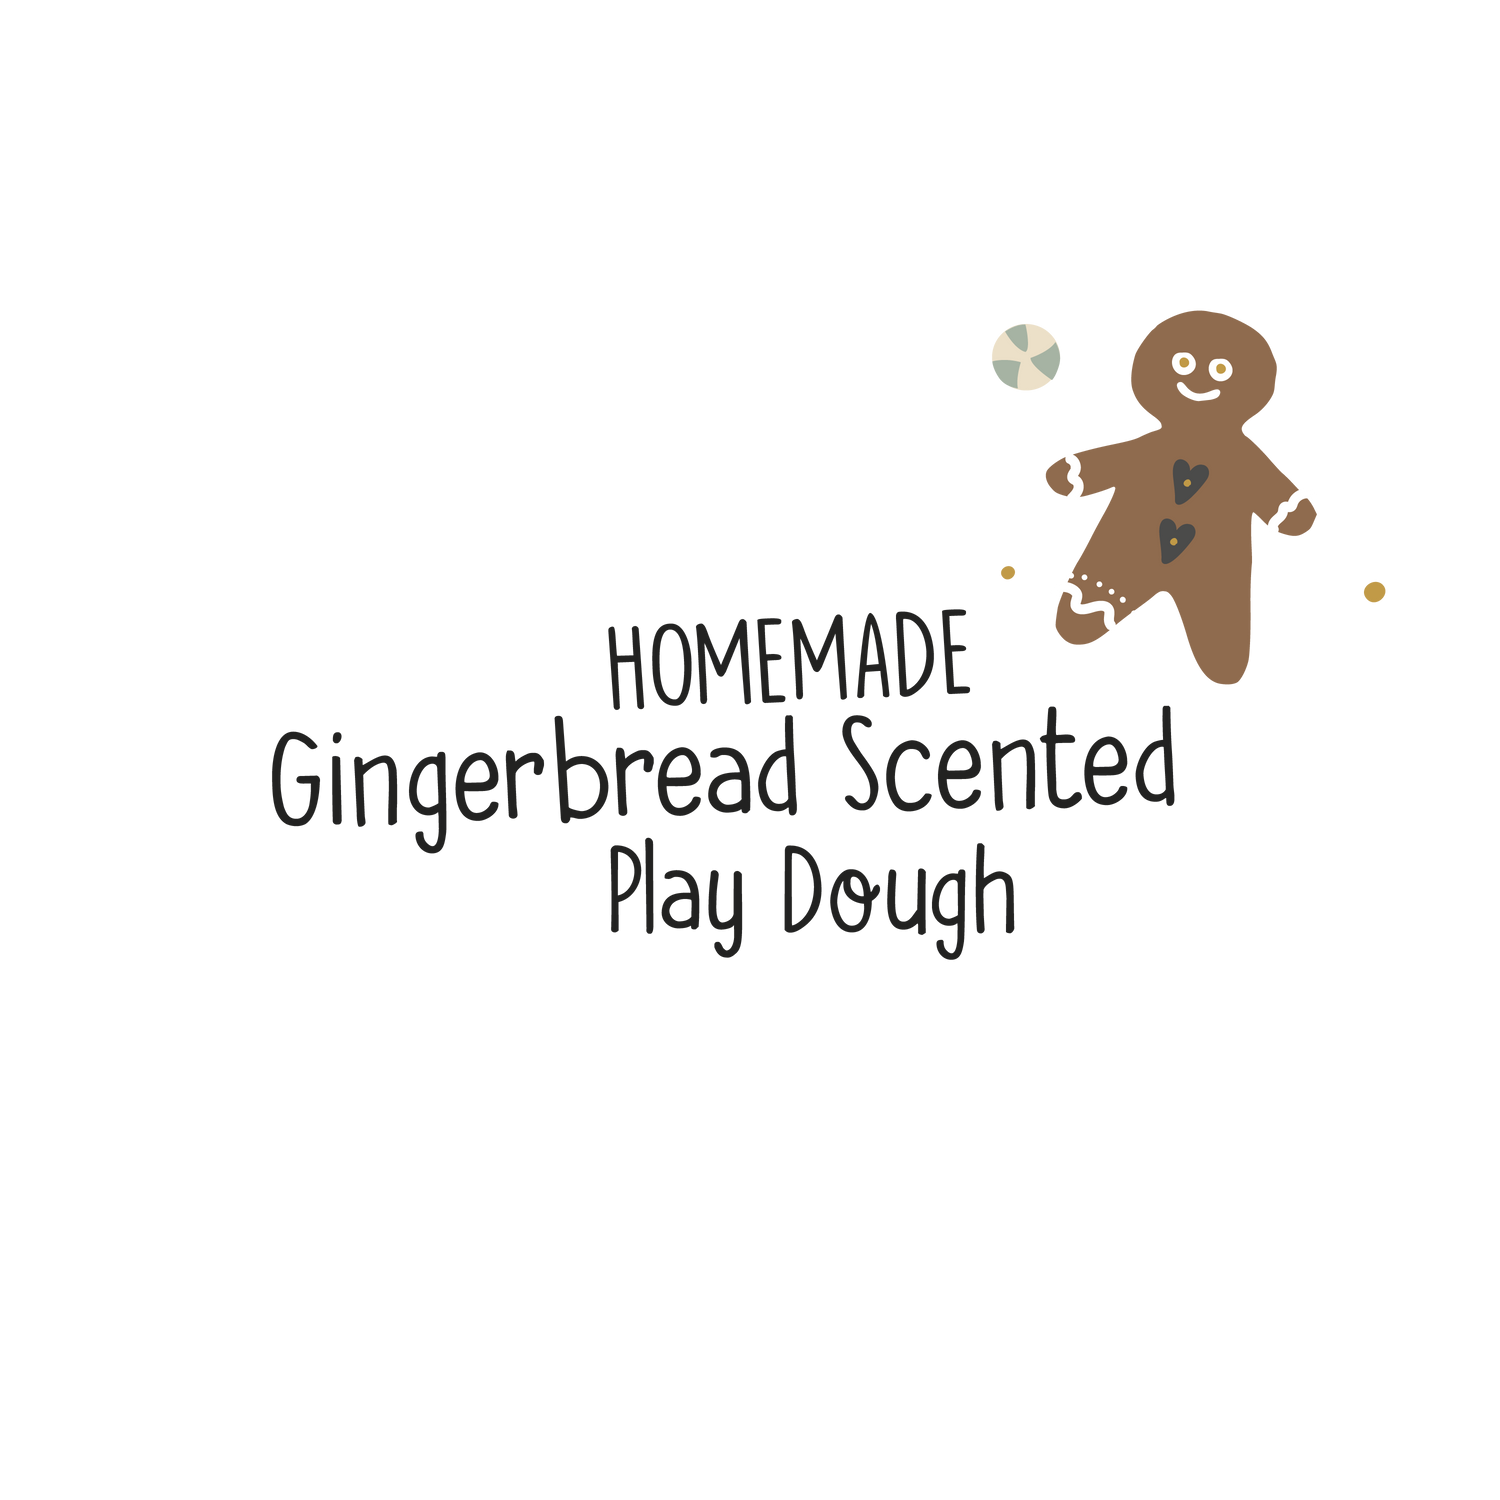 English version of the homemade gingerbread scented play dough recipe to print made by Les Belles Combines